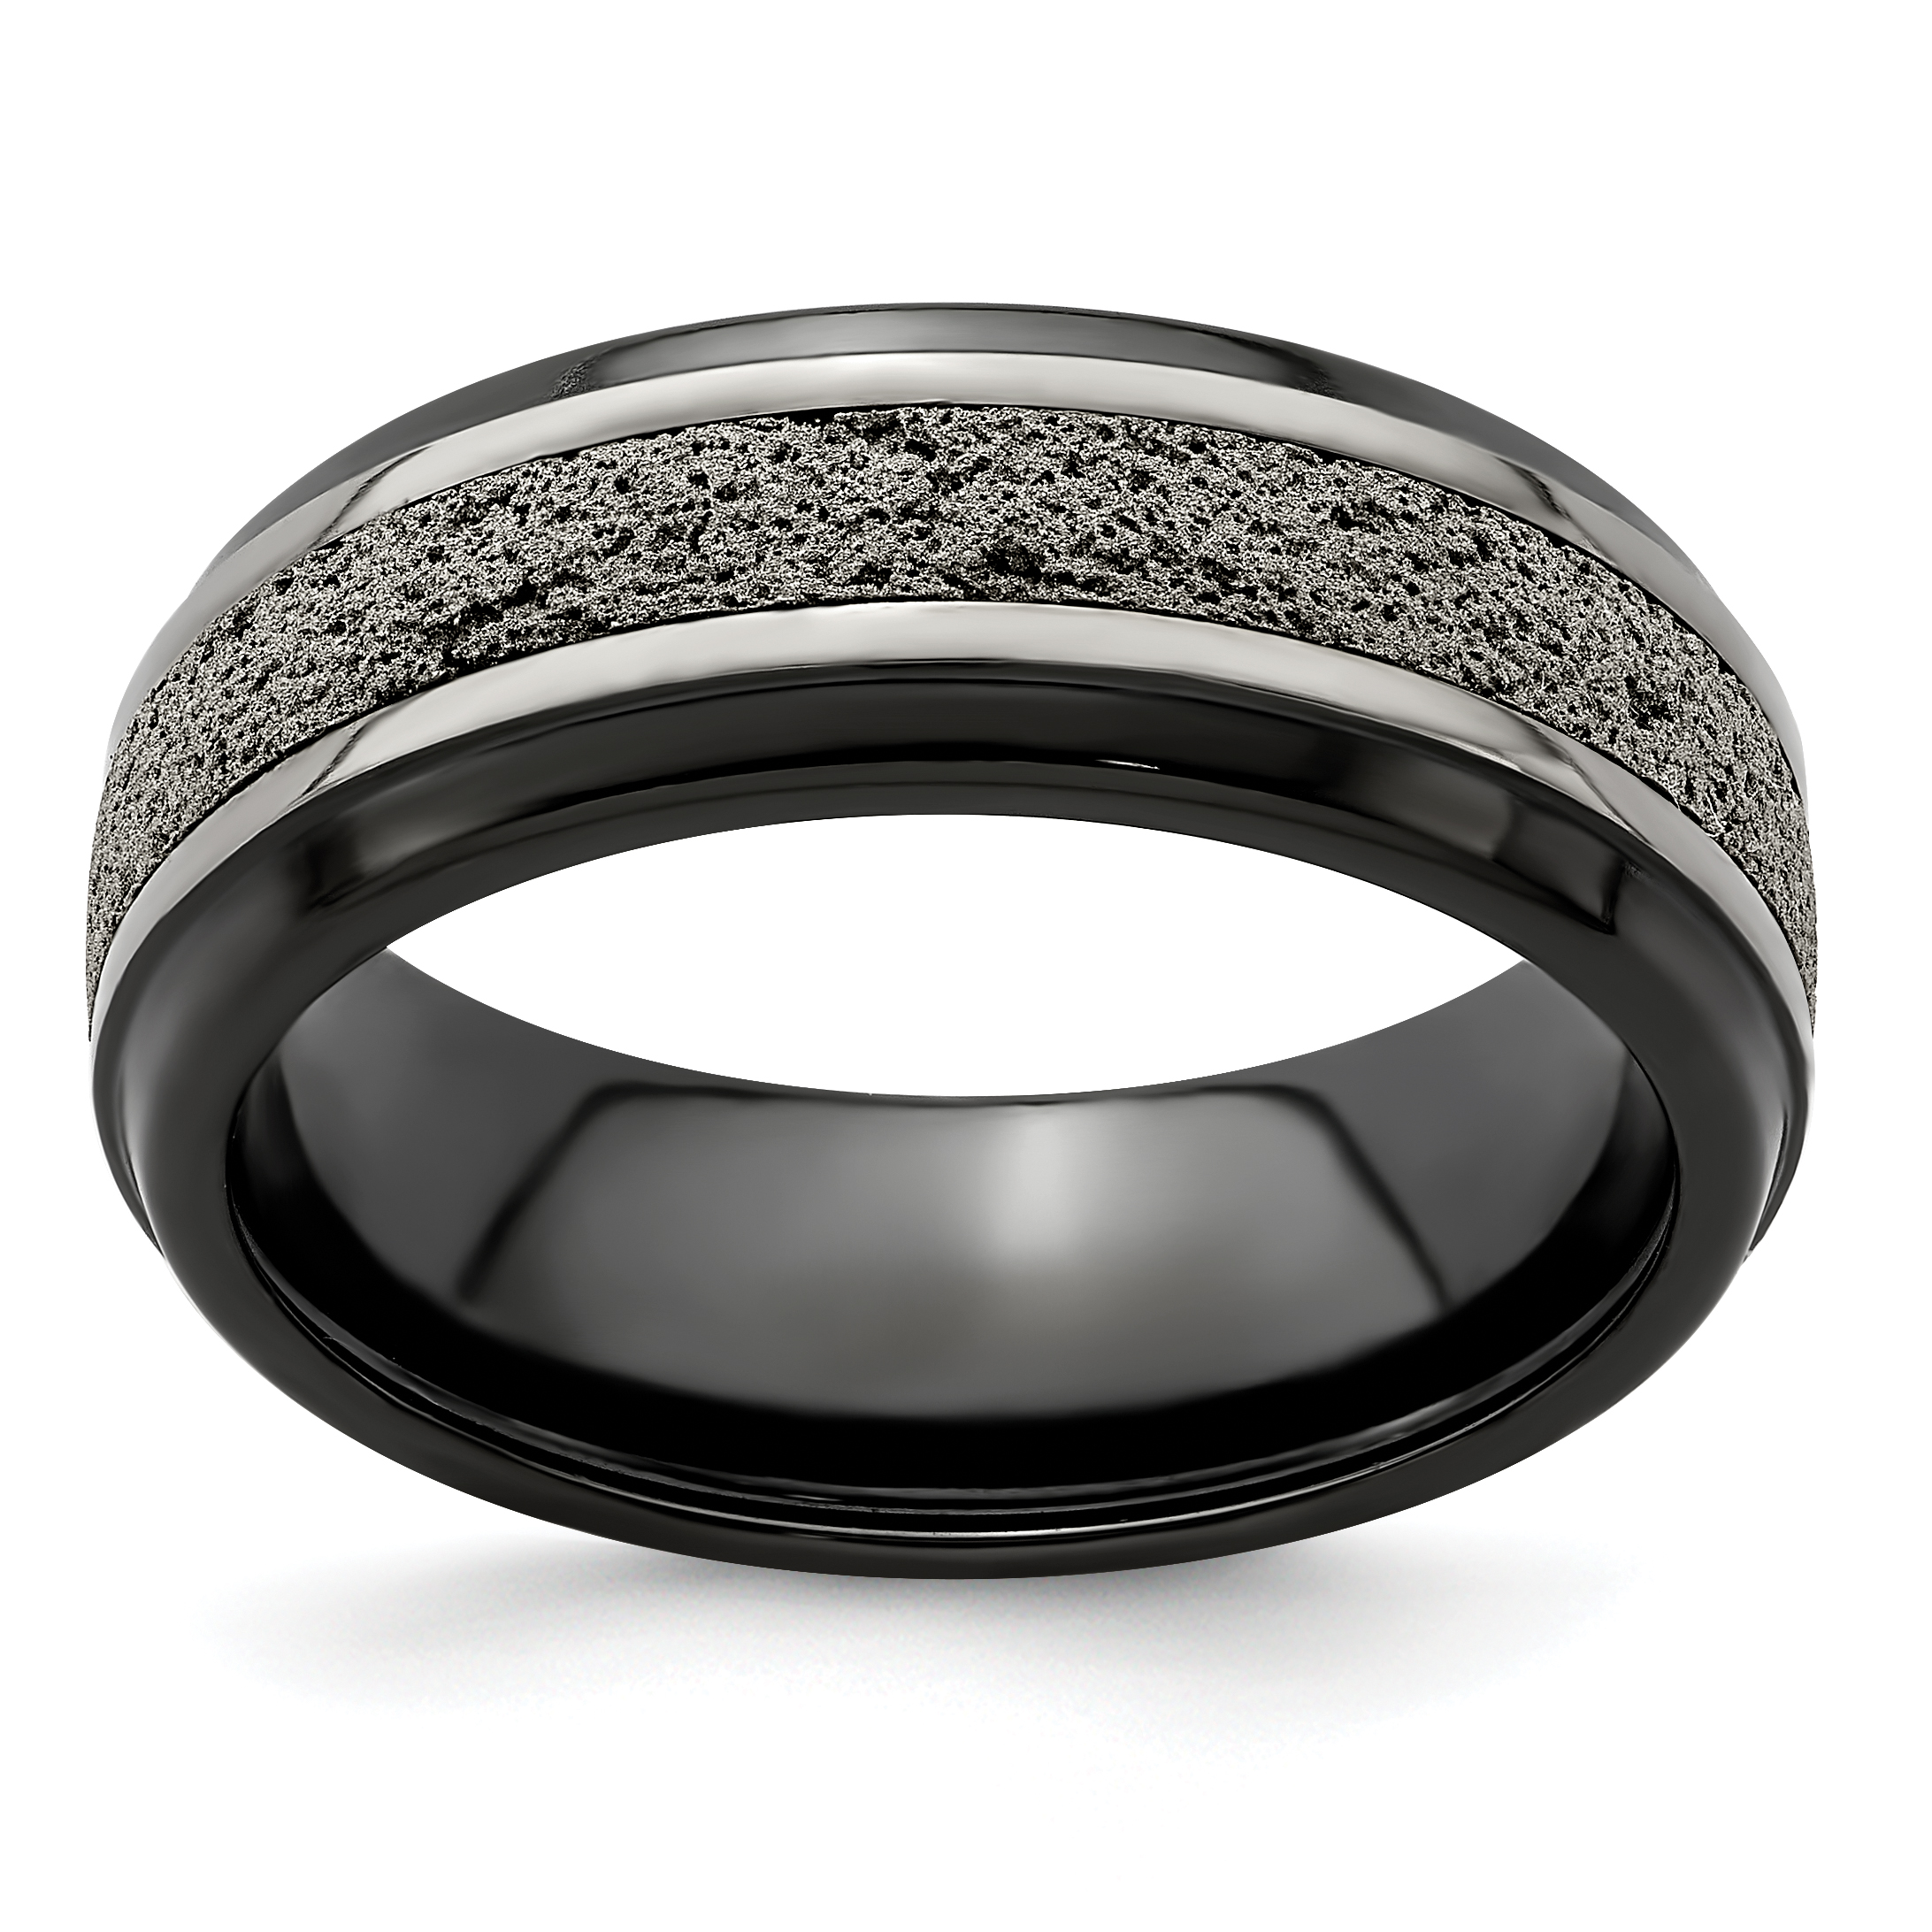 FB Jewels Solid Edward Mirell Stainless Steel W/Black Crete Inlay Stepped 8mm Wedding Band